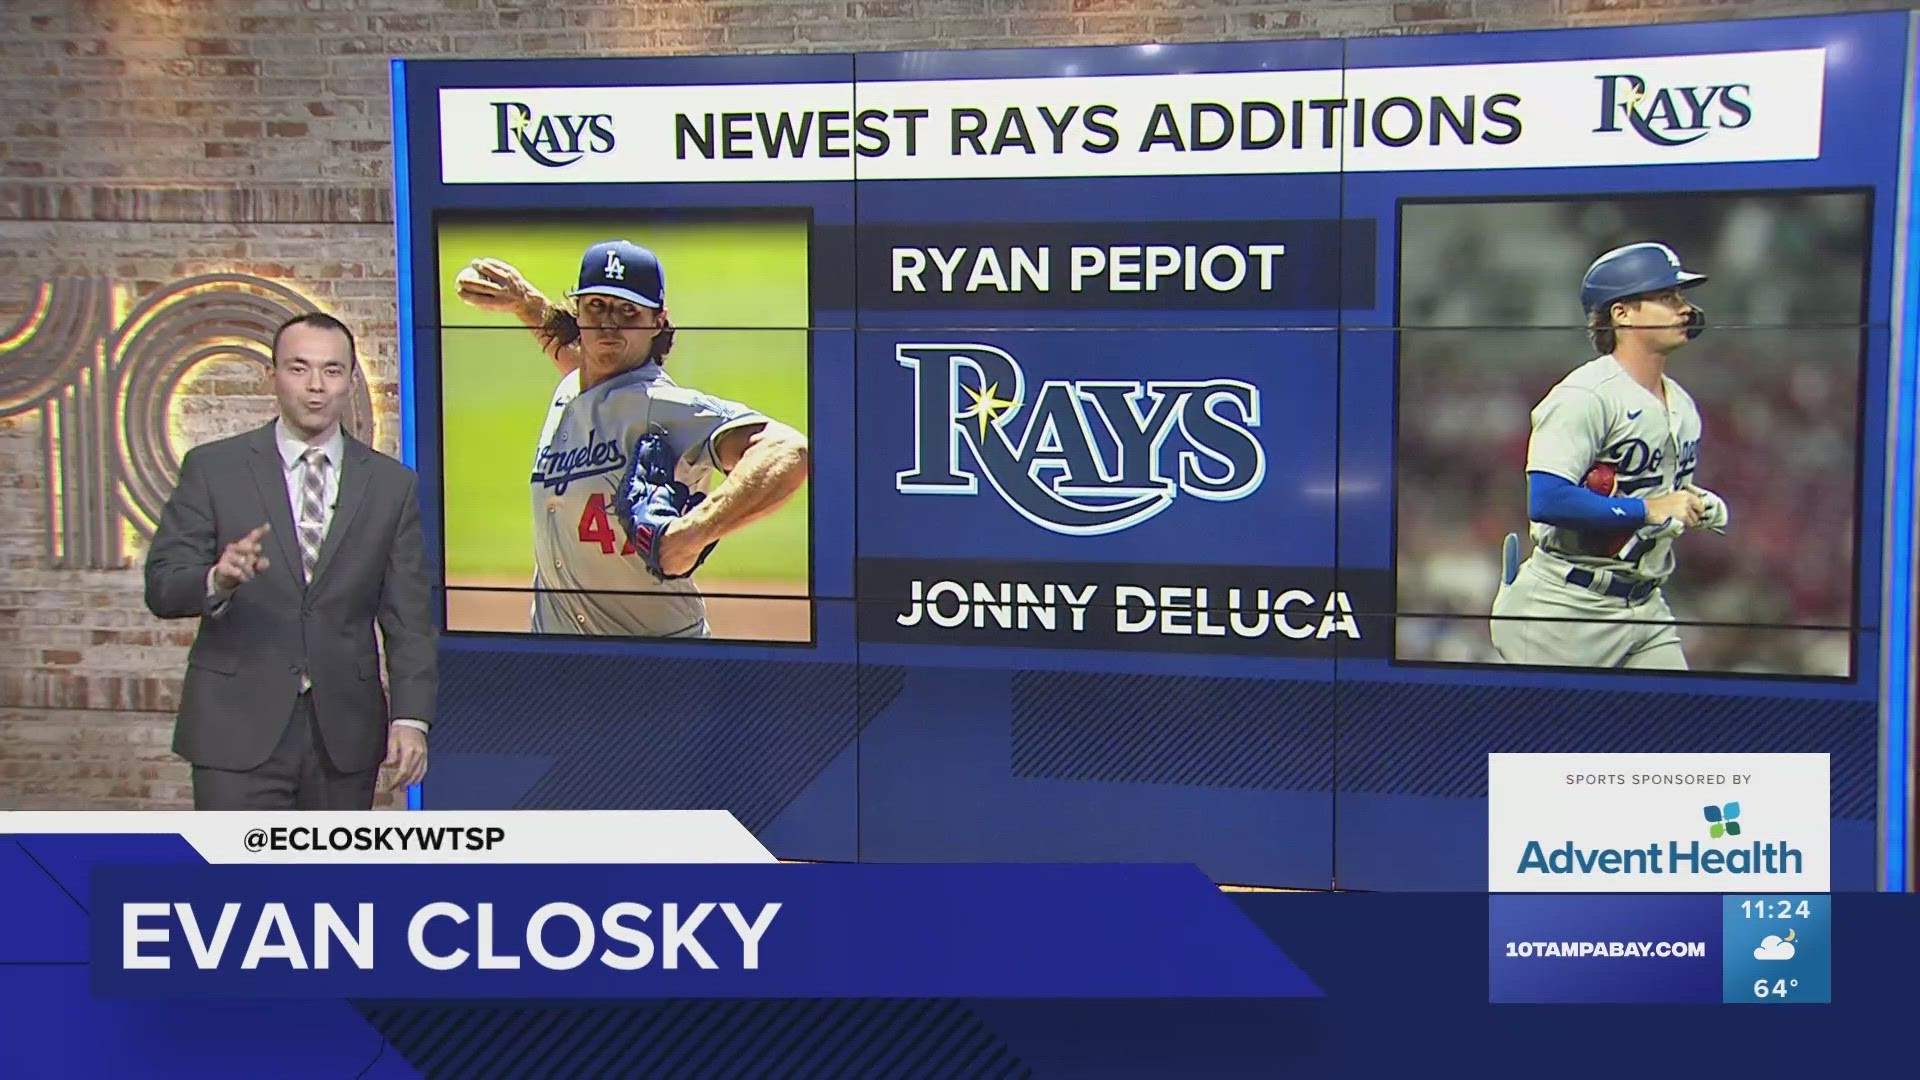 Jeff Passan with ESPN said the Rays would receive pitcher Ryan Pepiot and outfielder Jonny Deluca in exchange.